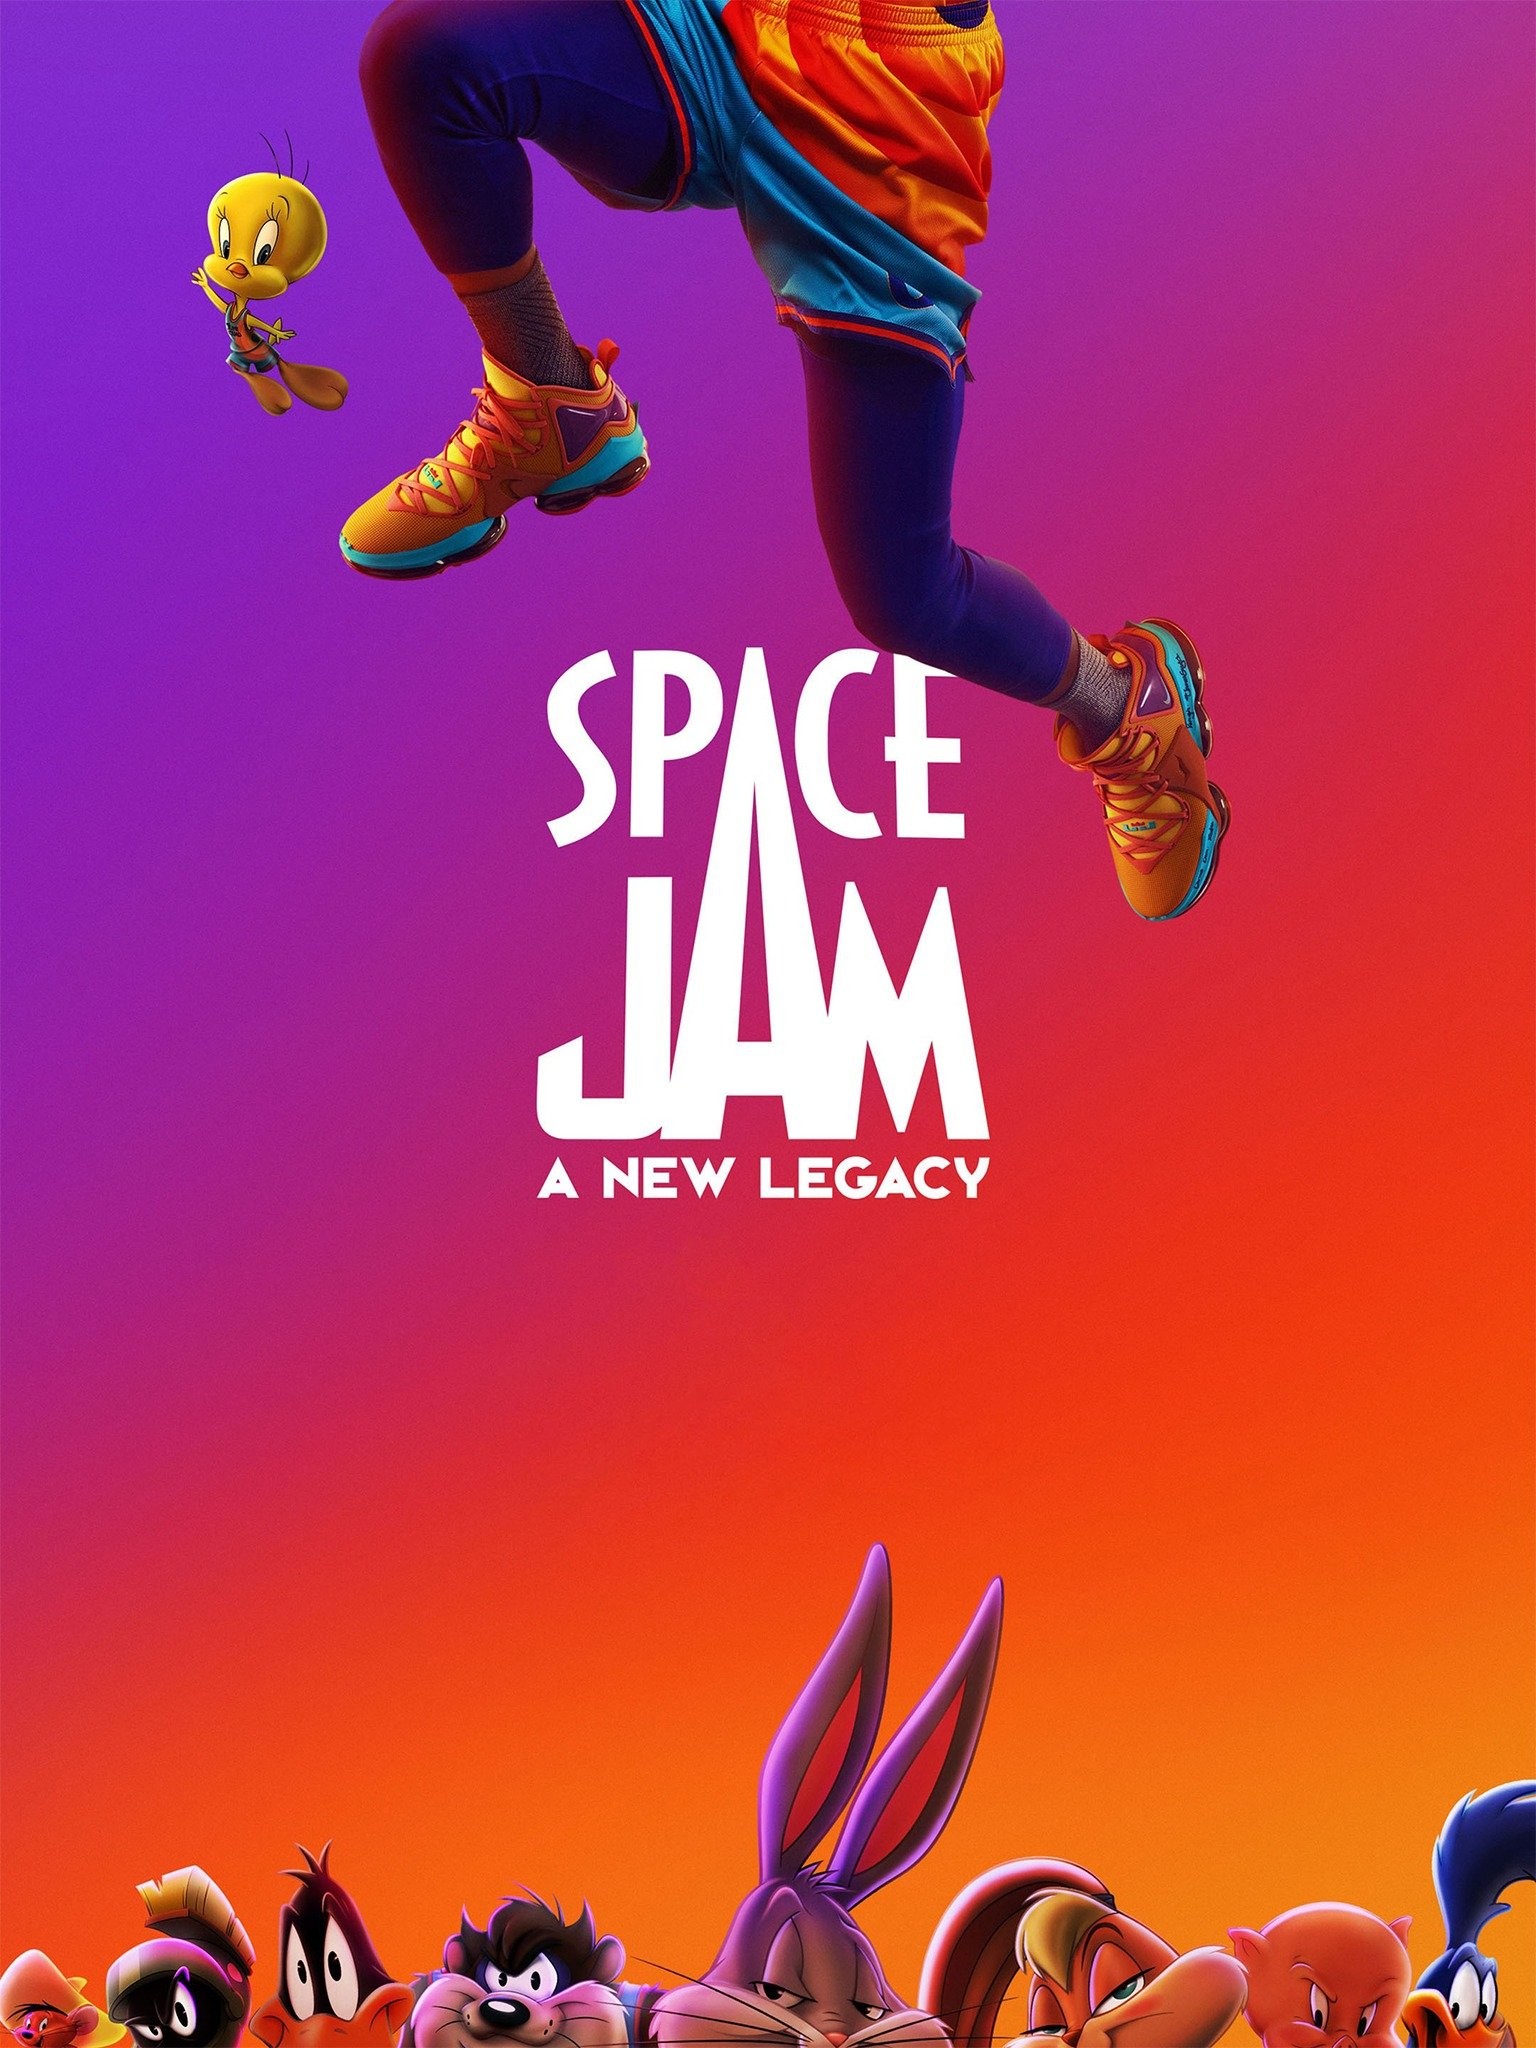 Dream Casting 'Space Jam 2' with Current Sports Stars